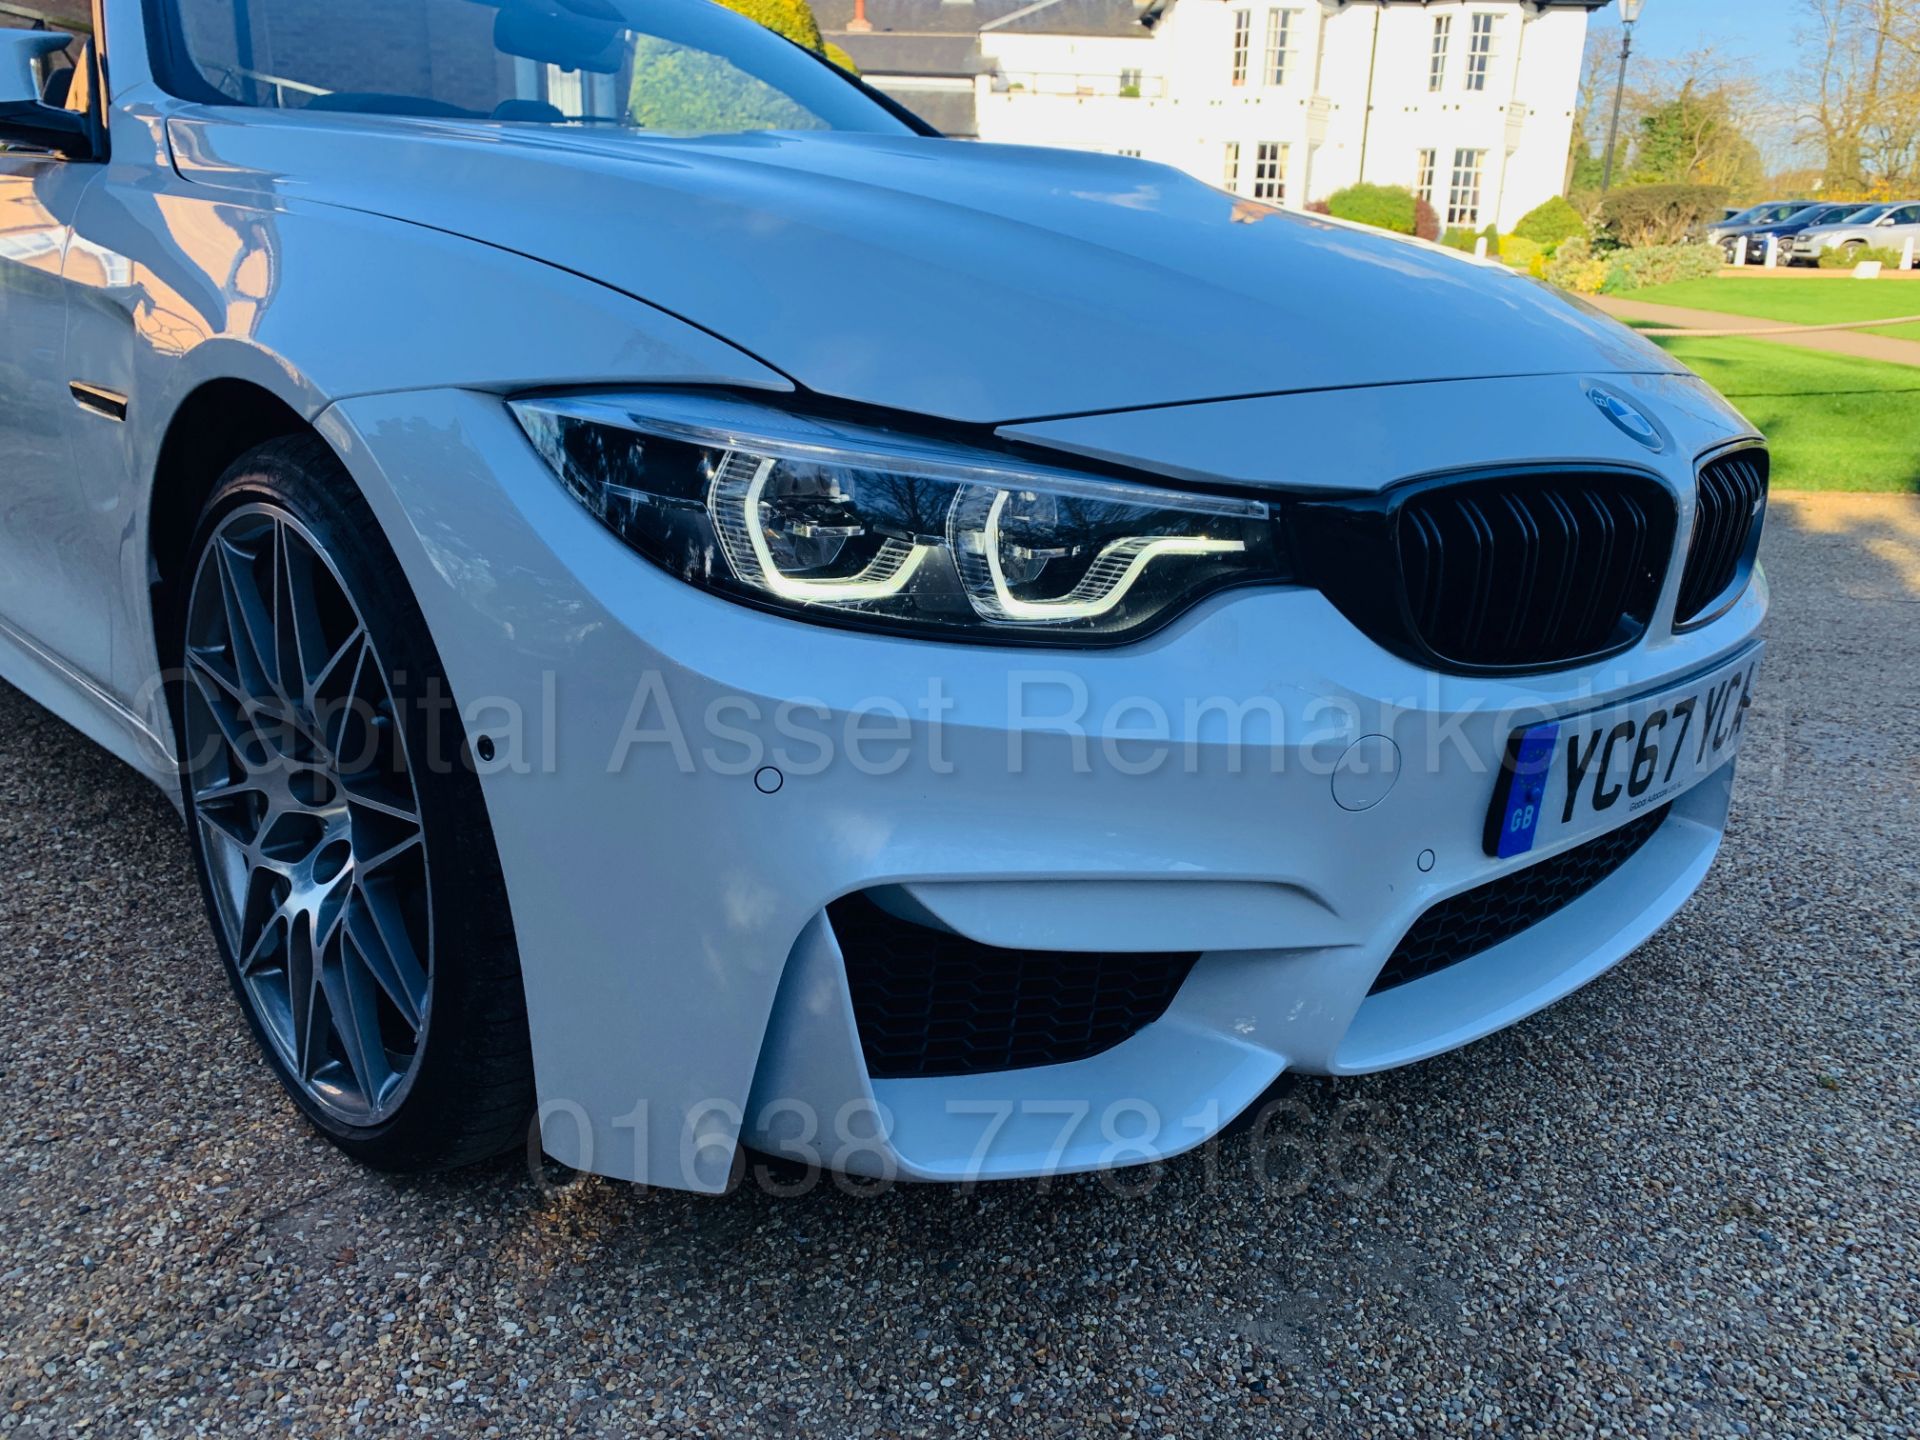 (On Sale) BMW M4 CONVERTIBLE *COMPETITION PACKAGE* (67 REG) 'M DCT AUTO - LEATHER - SAT NAV' *WOW* - Image 25 of 89